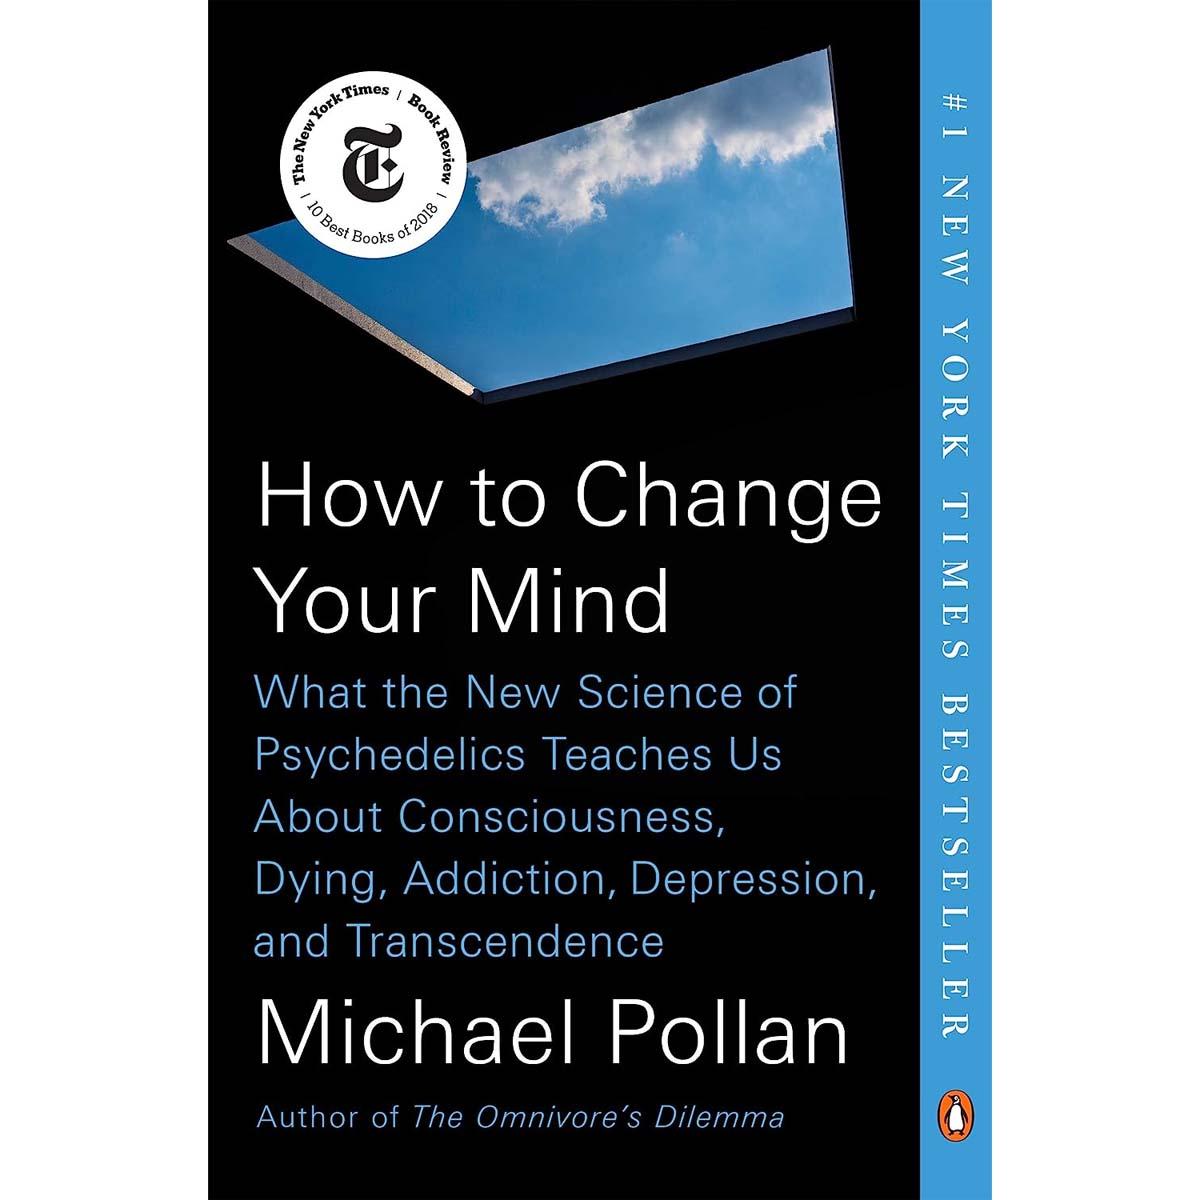 How to Change Your Mind by Michael Pollan eBook for $1.99